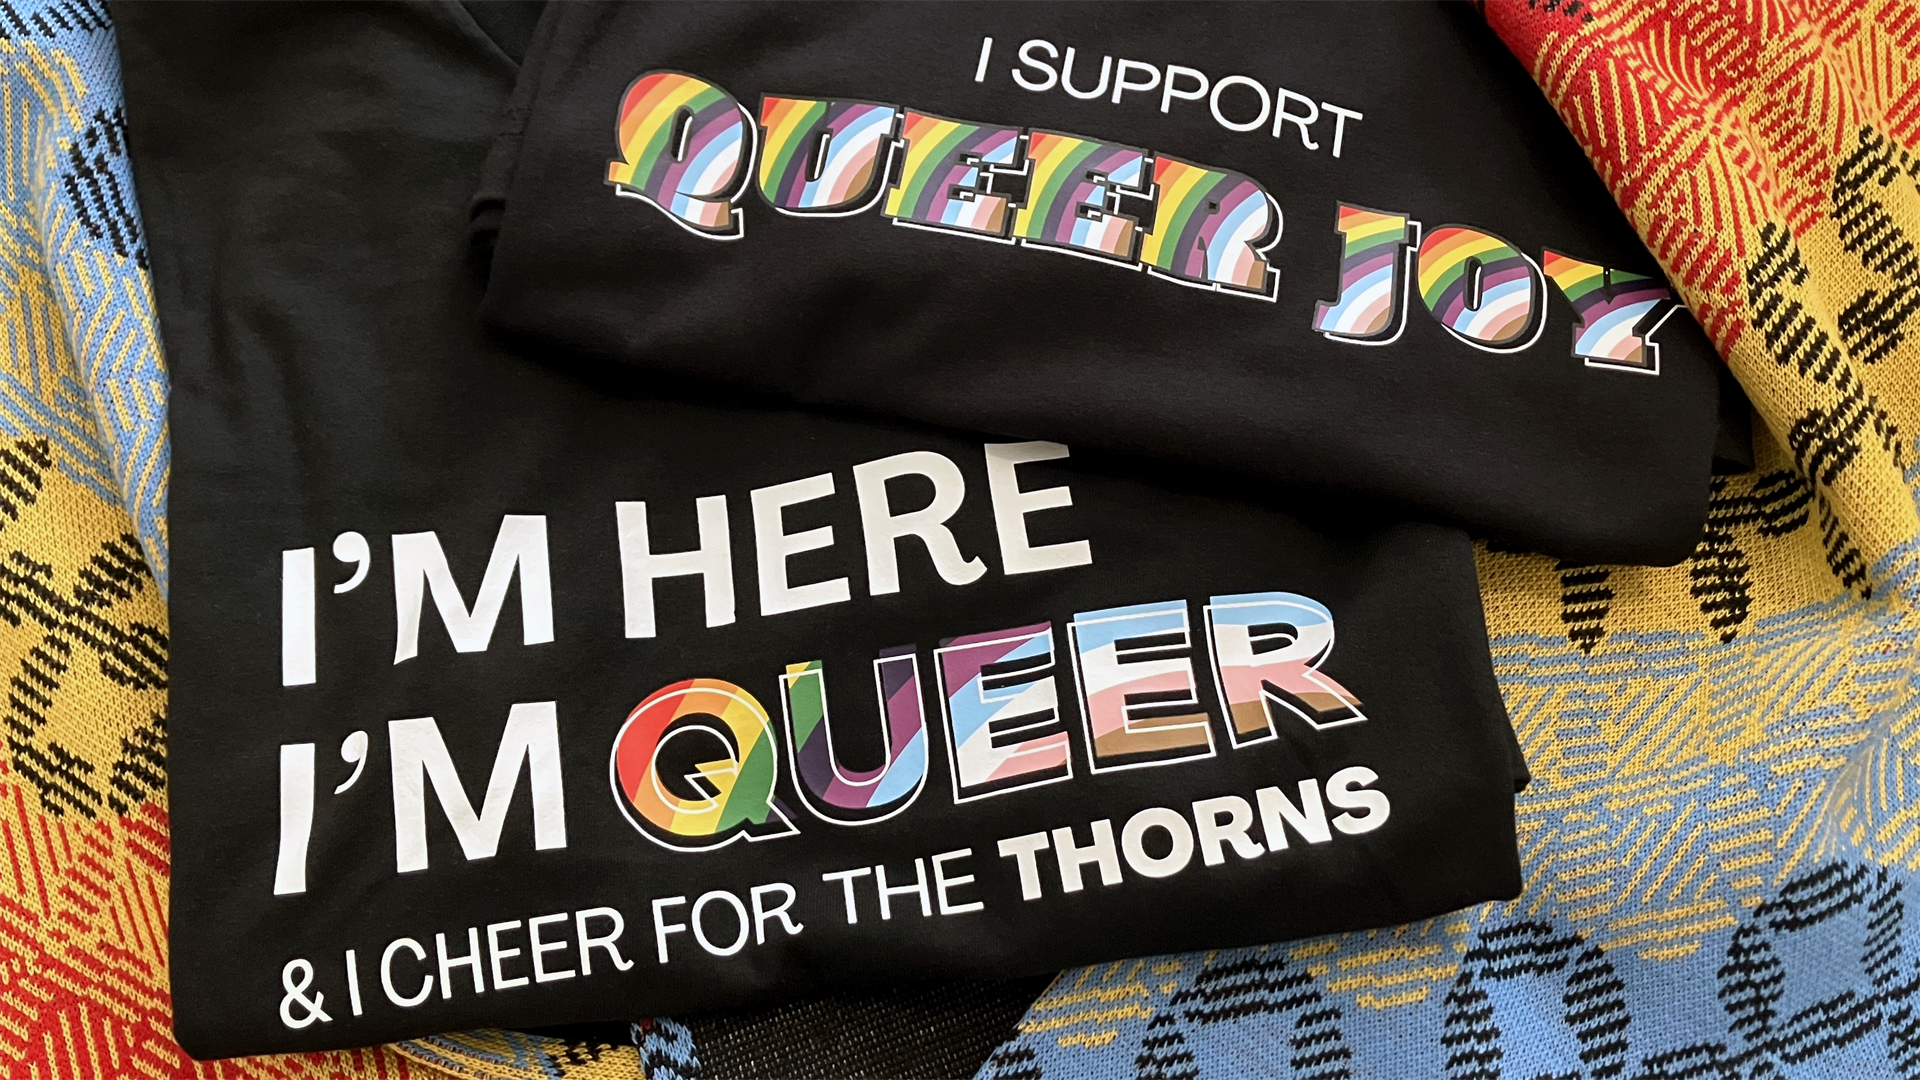 Two black t-shirts. One design reads "I support queer joy" and the other reads "I'm here, I'm queer, & I cheer for the Thorns". The text is in pride colors for the words queer and joy.